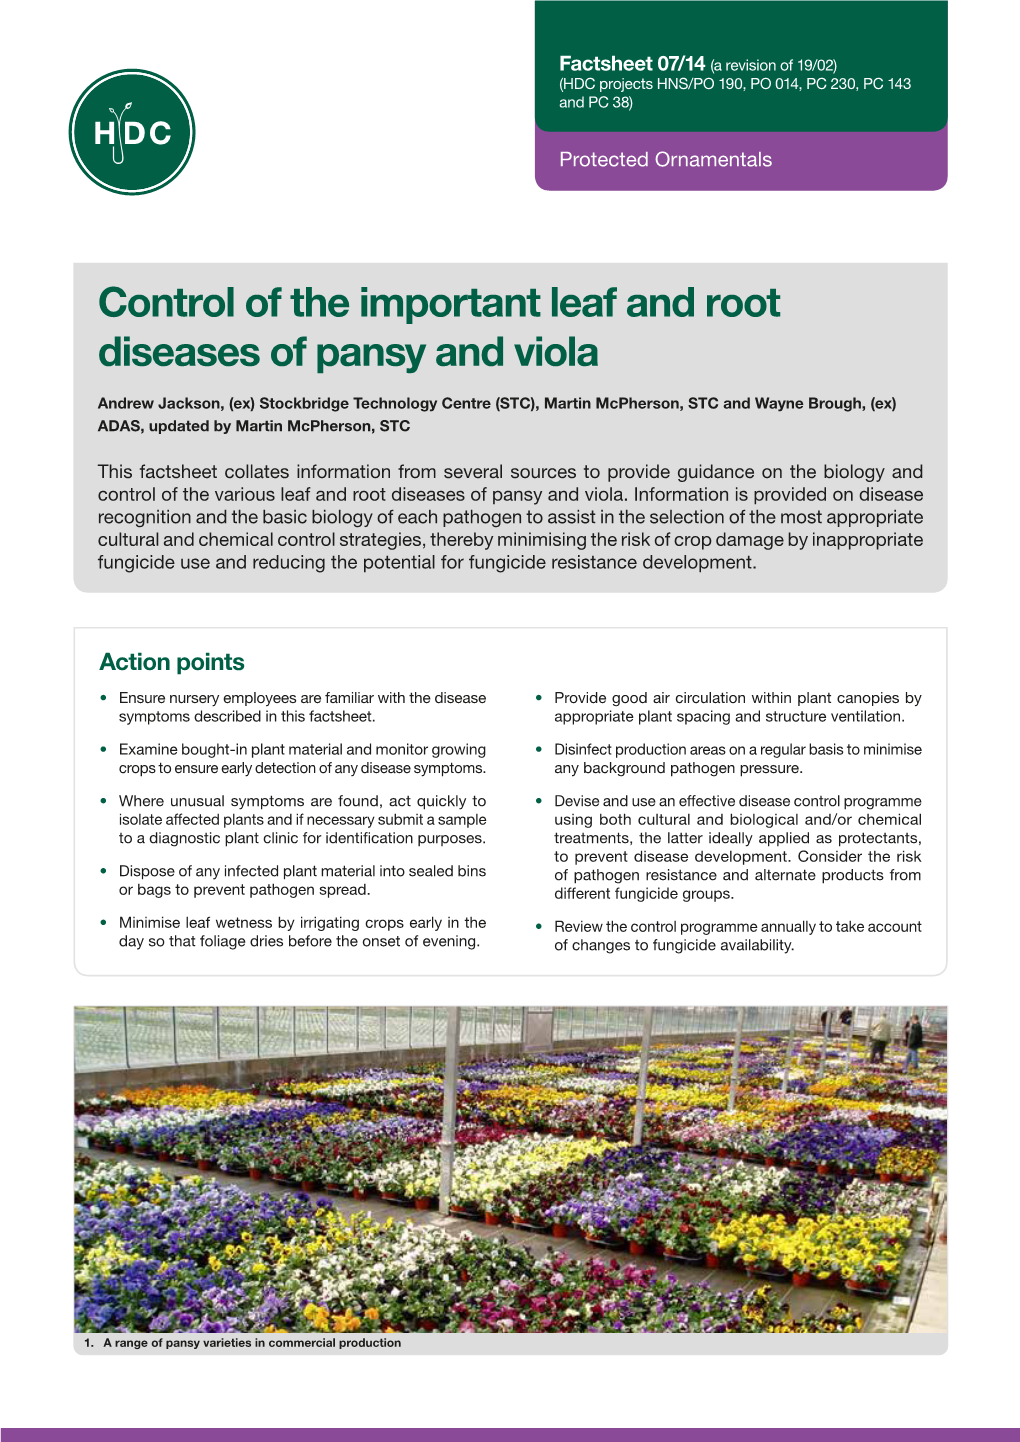 Control of the Important Leaf and Root Diseases of Pansy and Viola